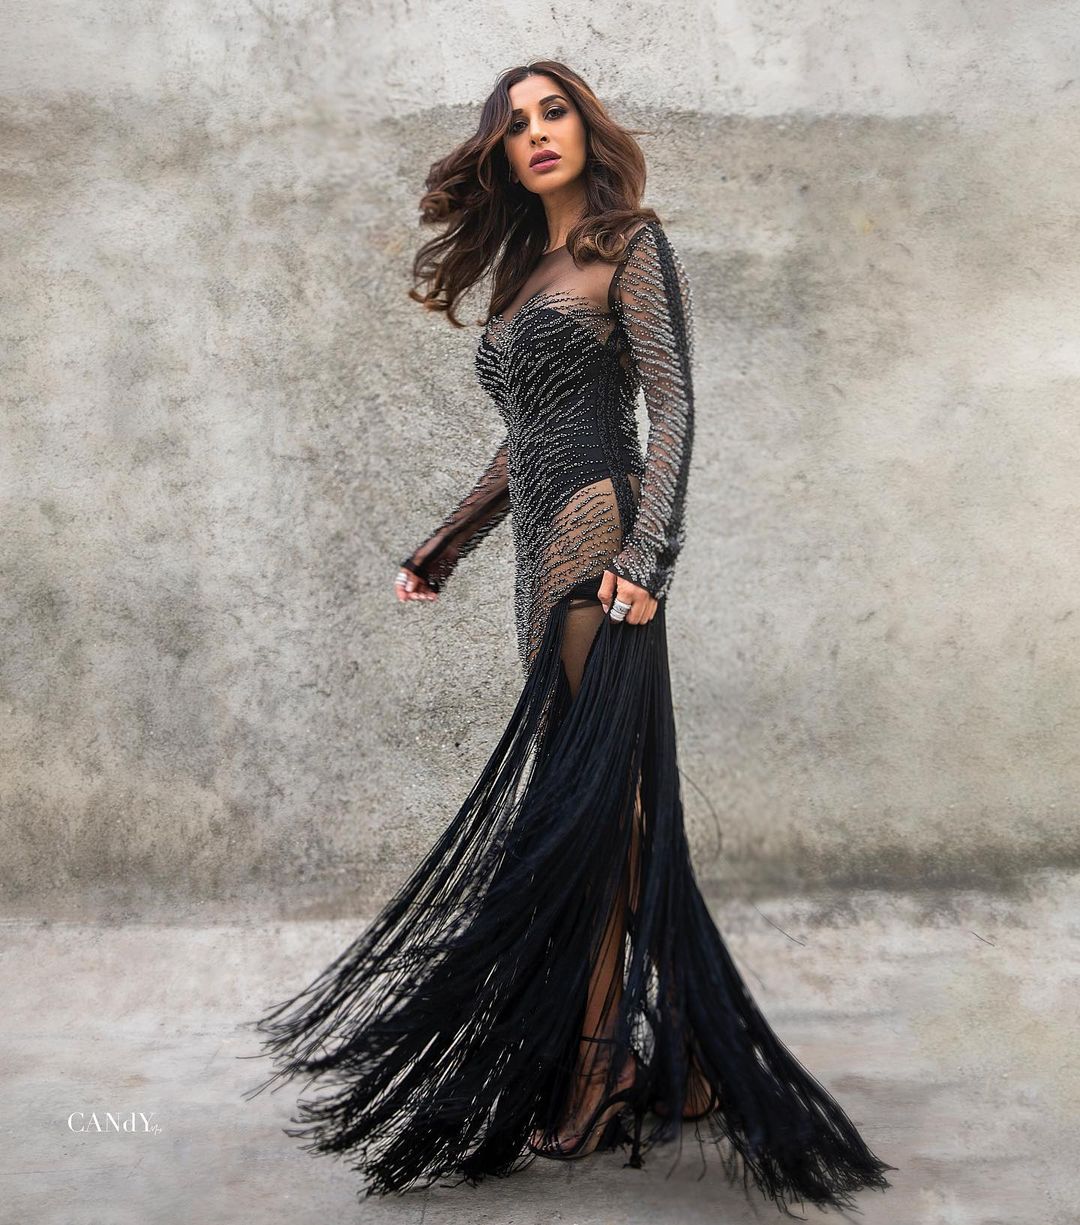 Sophie Choudry aces the semi-sheer tassel dress like a boss babe.